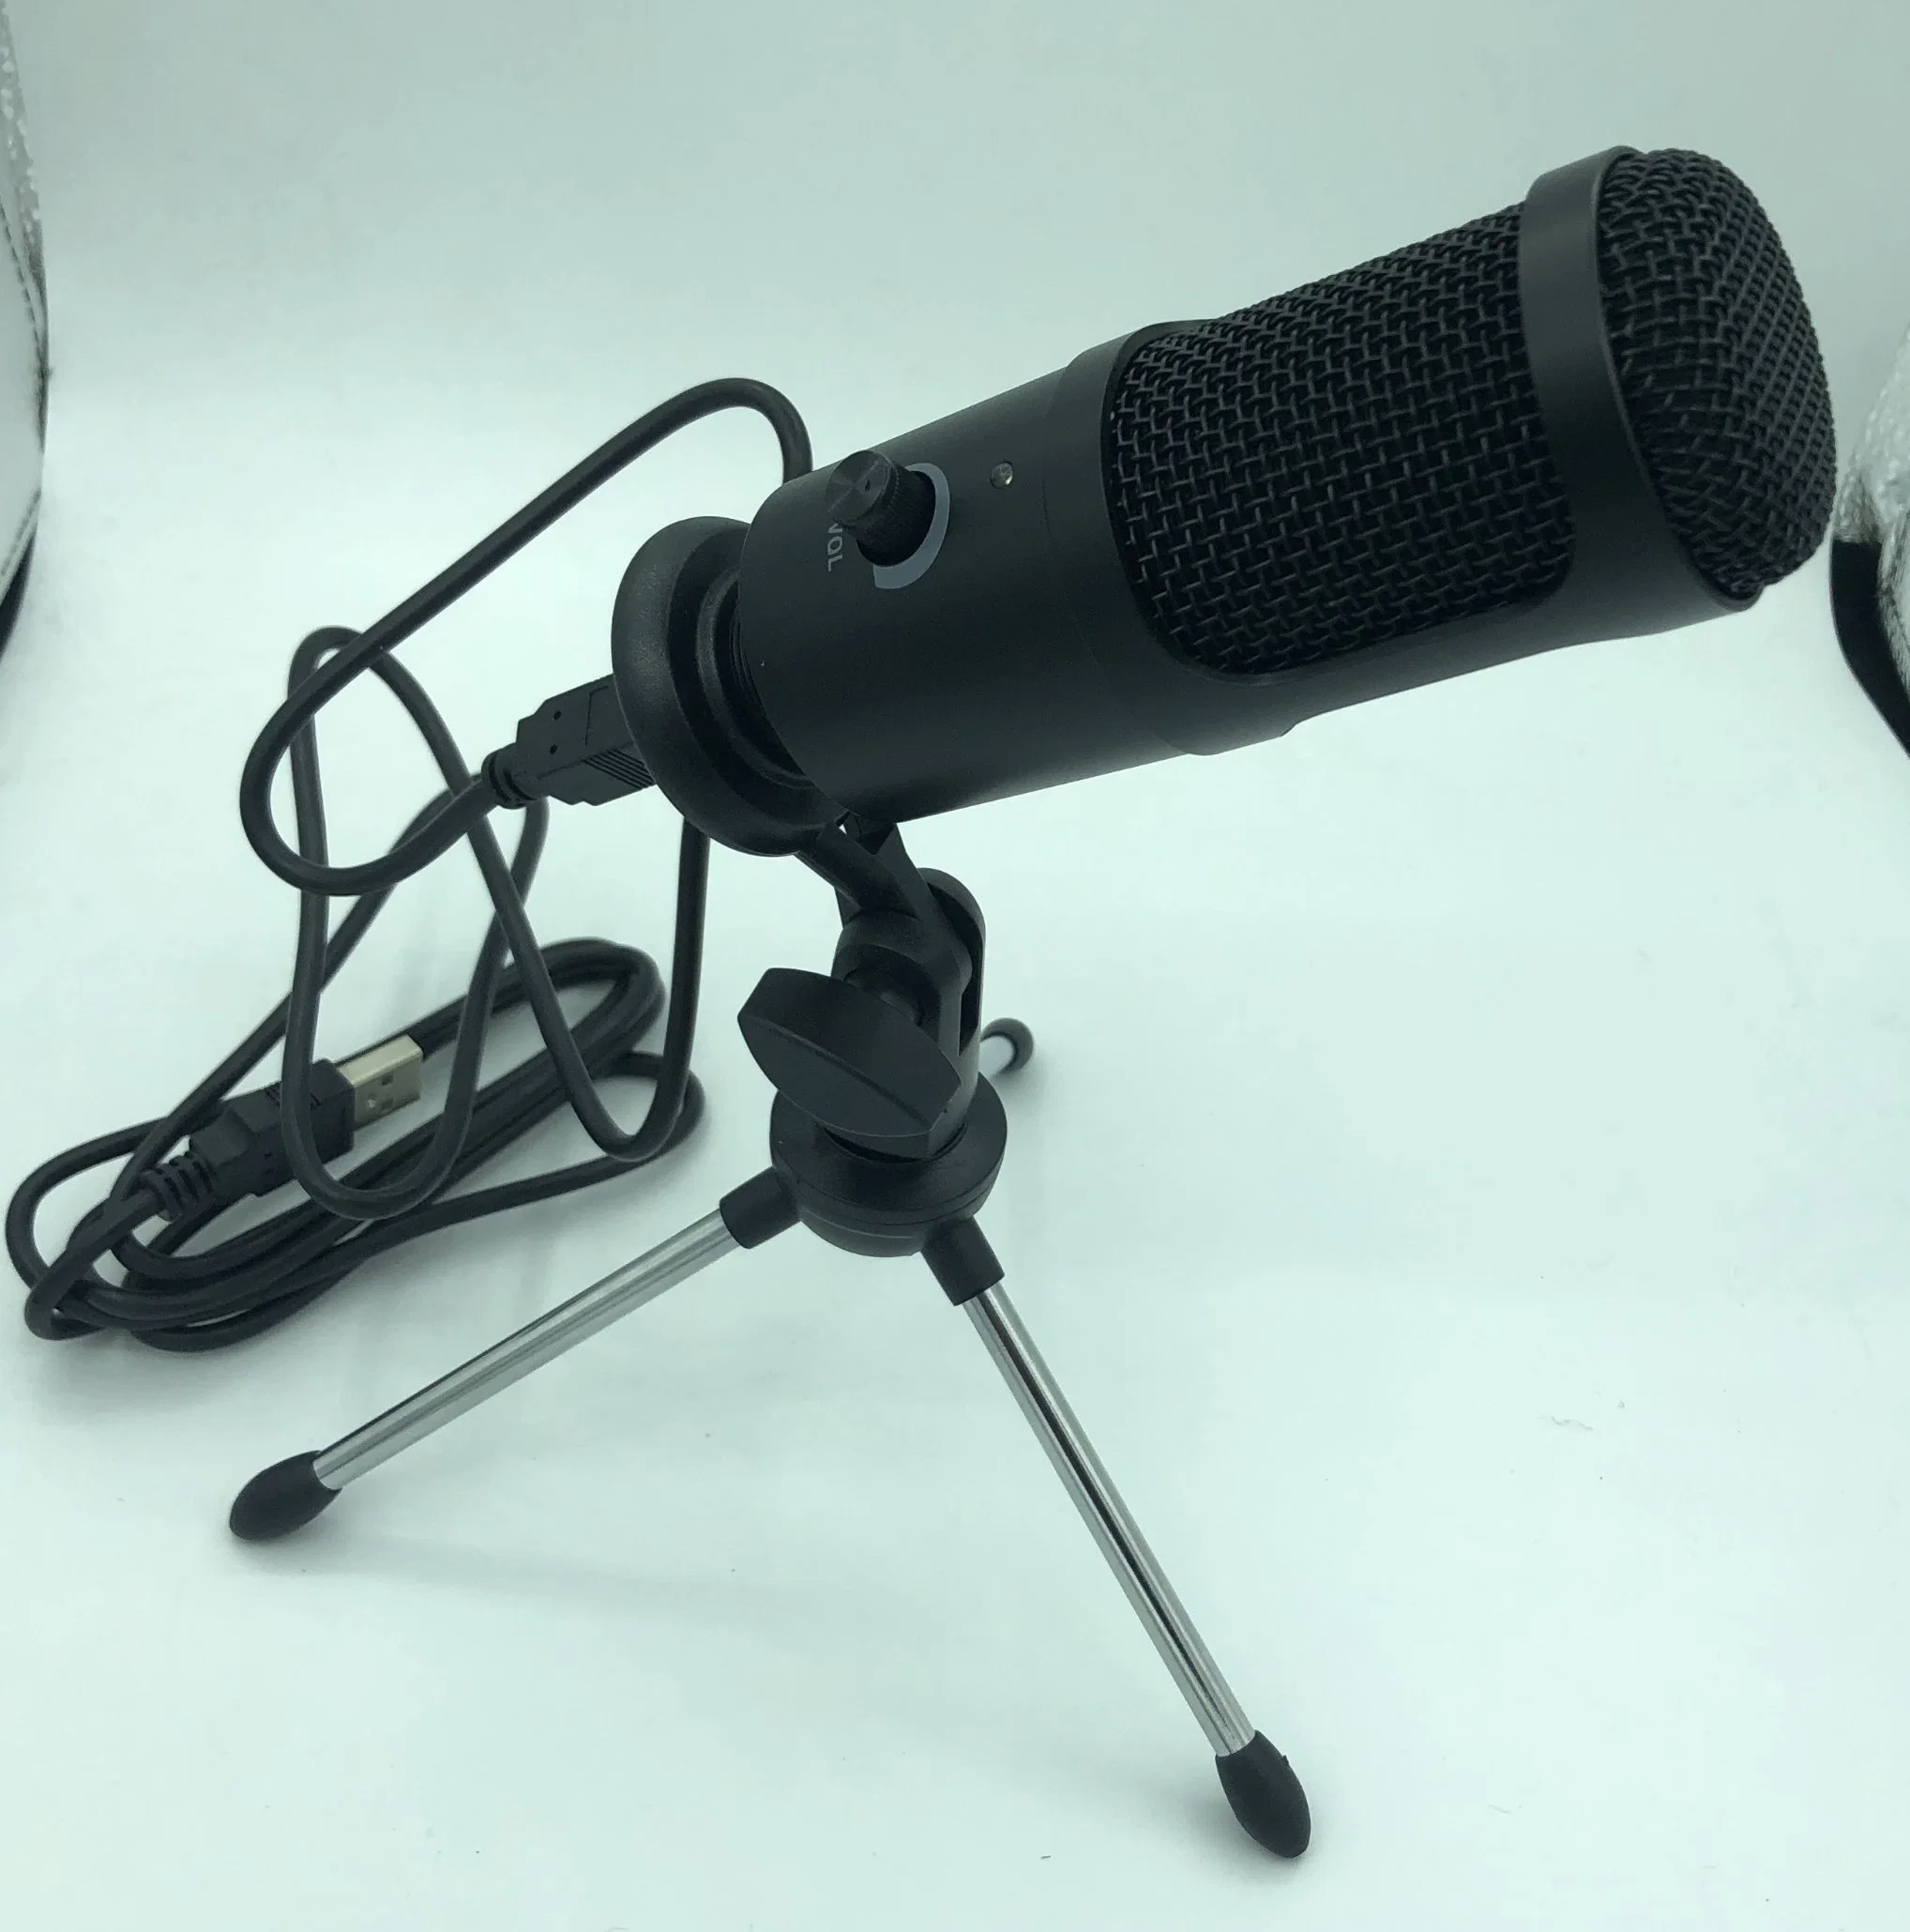 Condenser USB Microphone for Computer